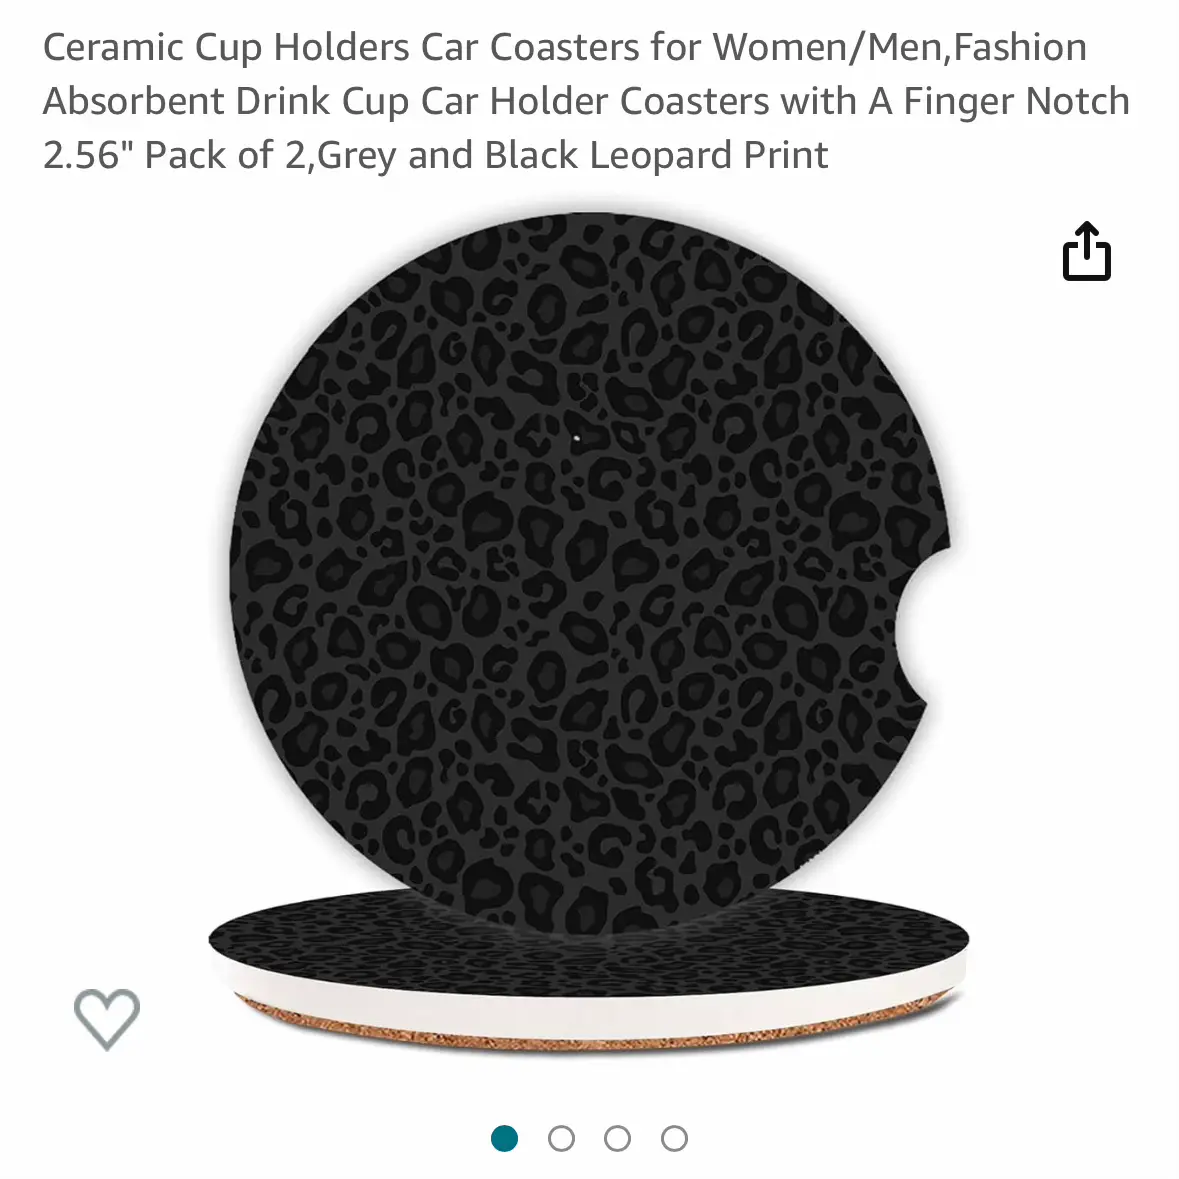 car cup coasters for women - Lemon8 Search